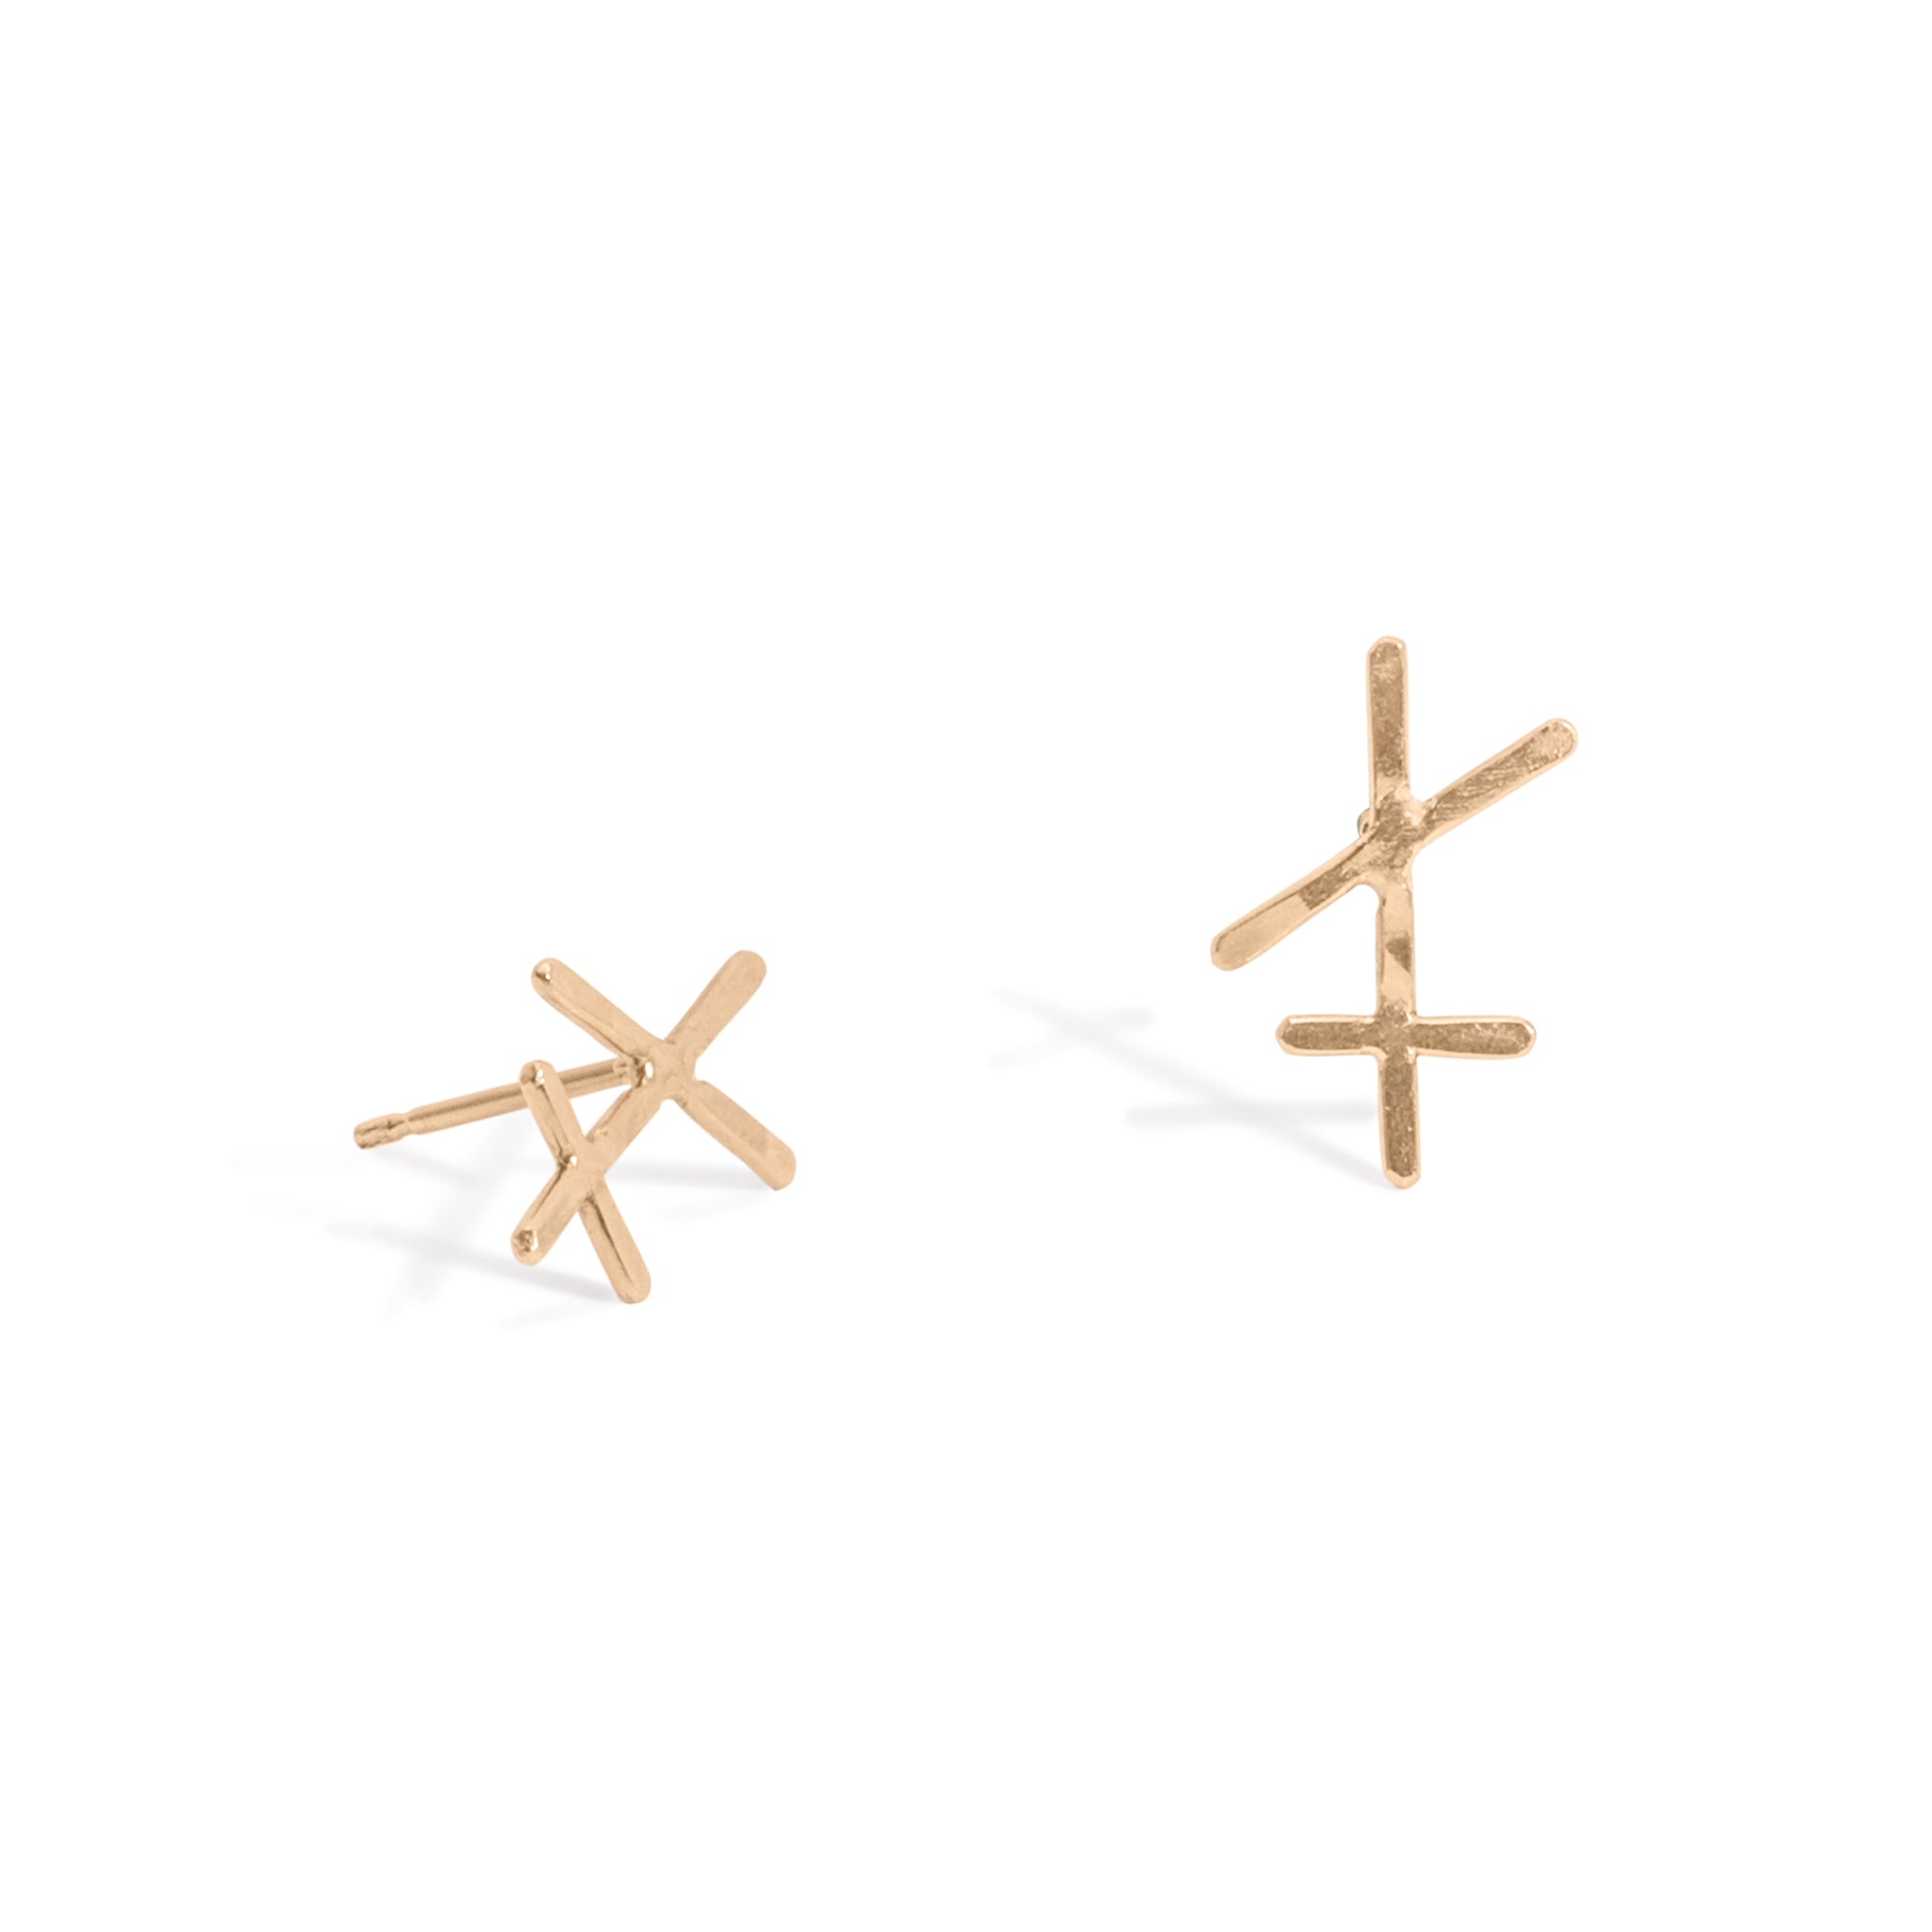 Chaos Studs, featuring a petite hammered wire bar with two intersecting lines. These modern studs are handmade from 14k gold